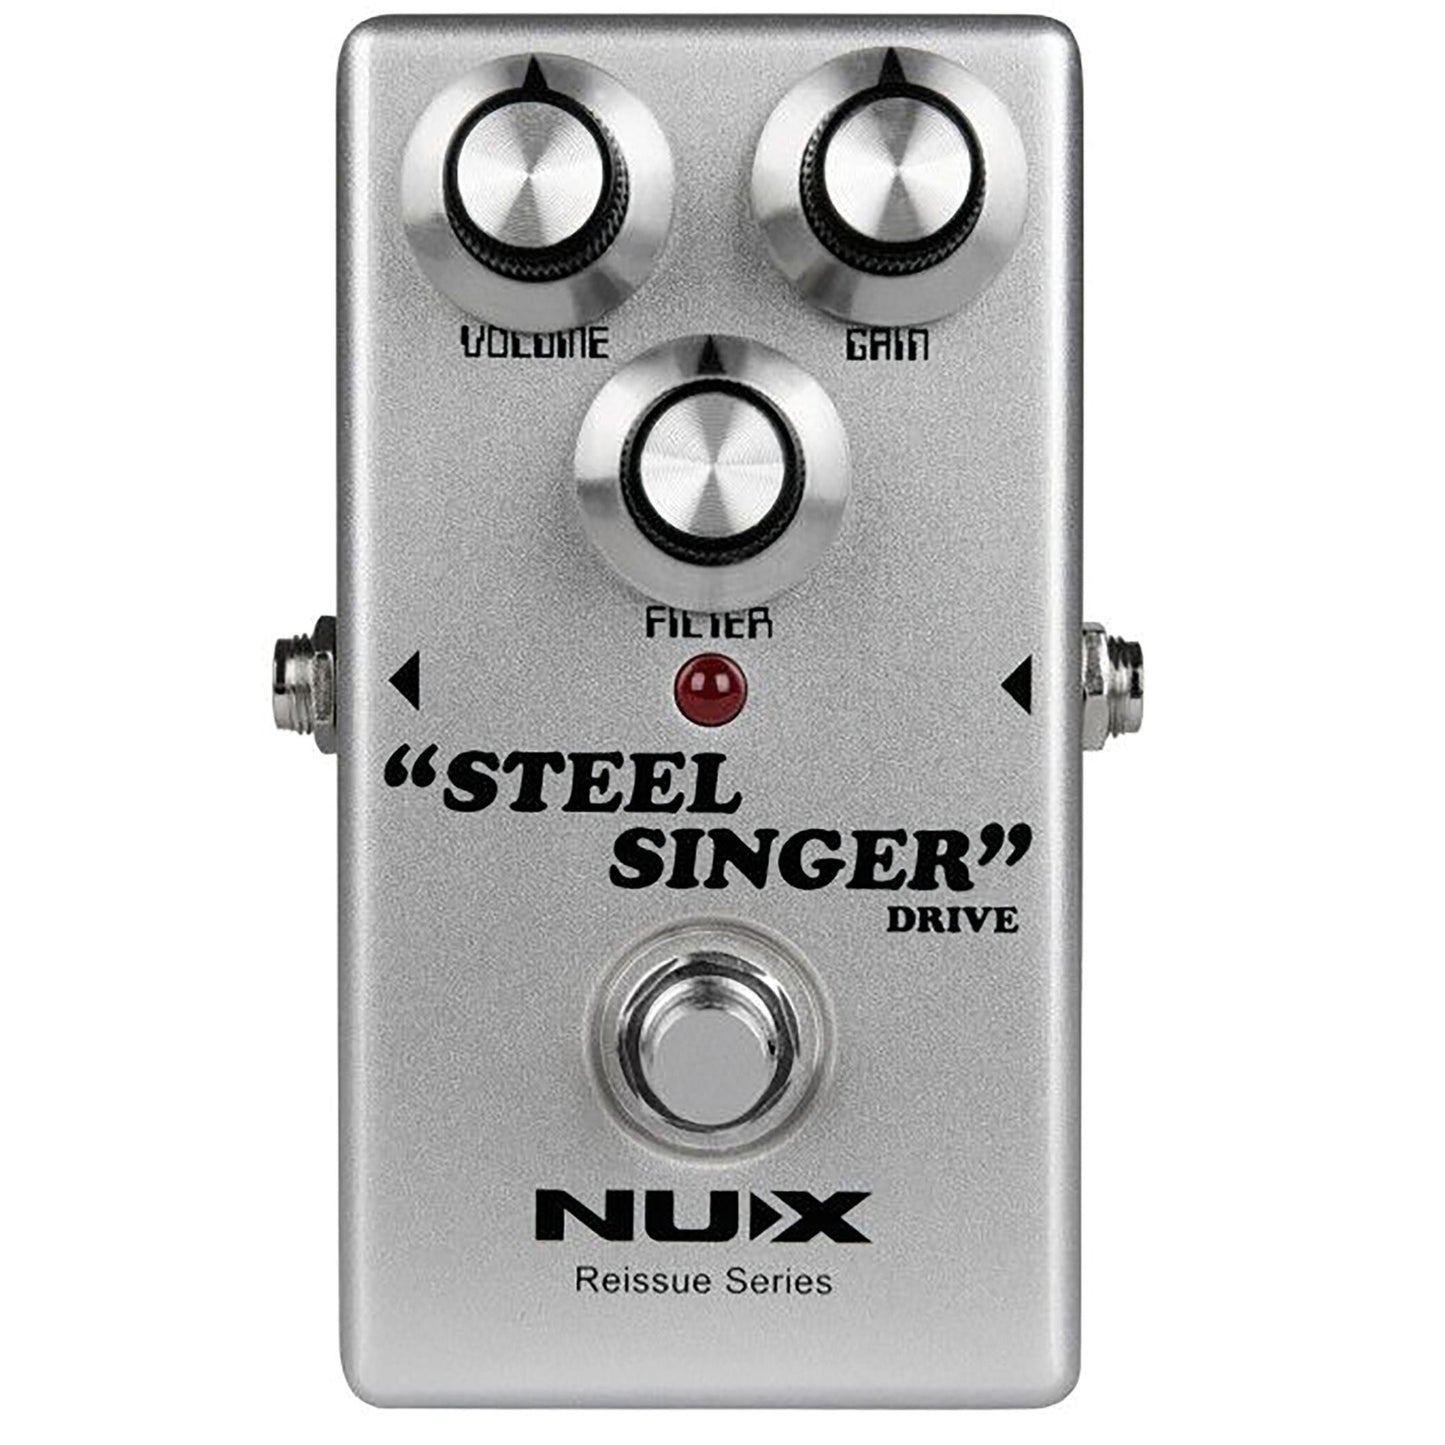 NUX Steel Singer Drive Guitar Effects Pedal